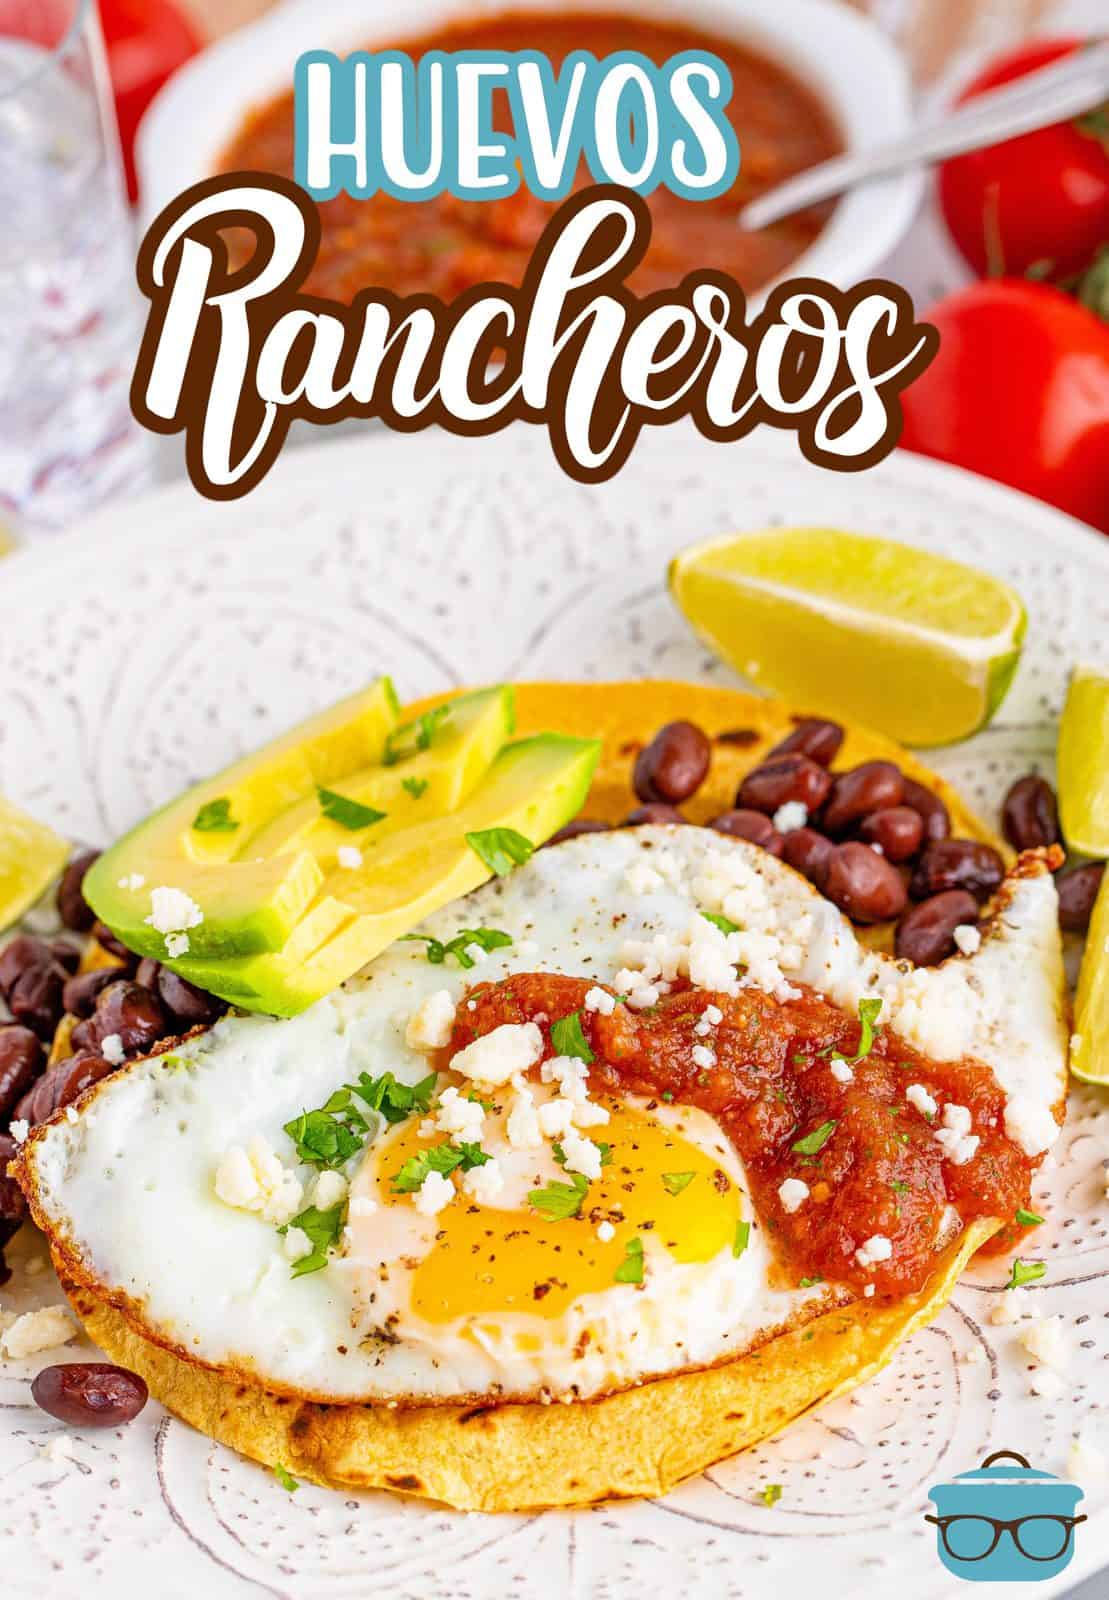 Pinterest image of Huevos Rancheros on plate showing all the toppings.